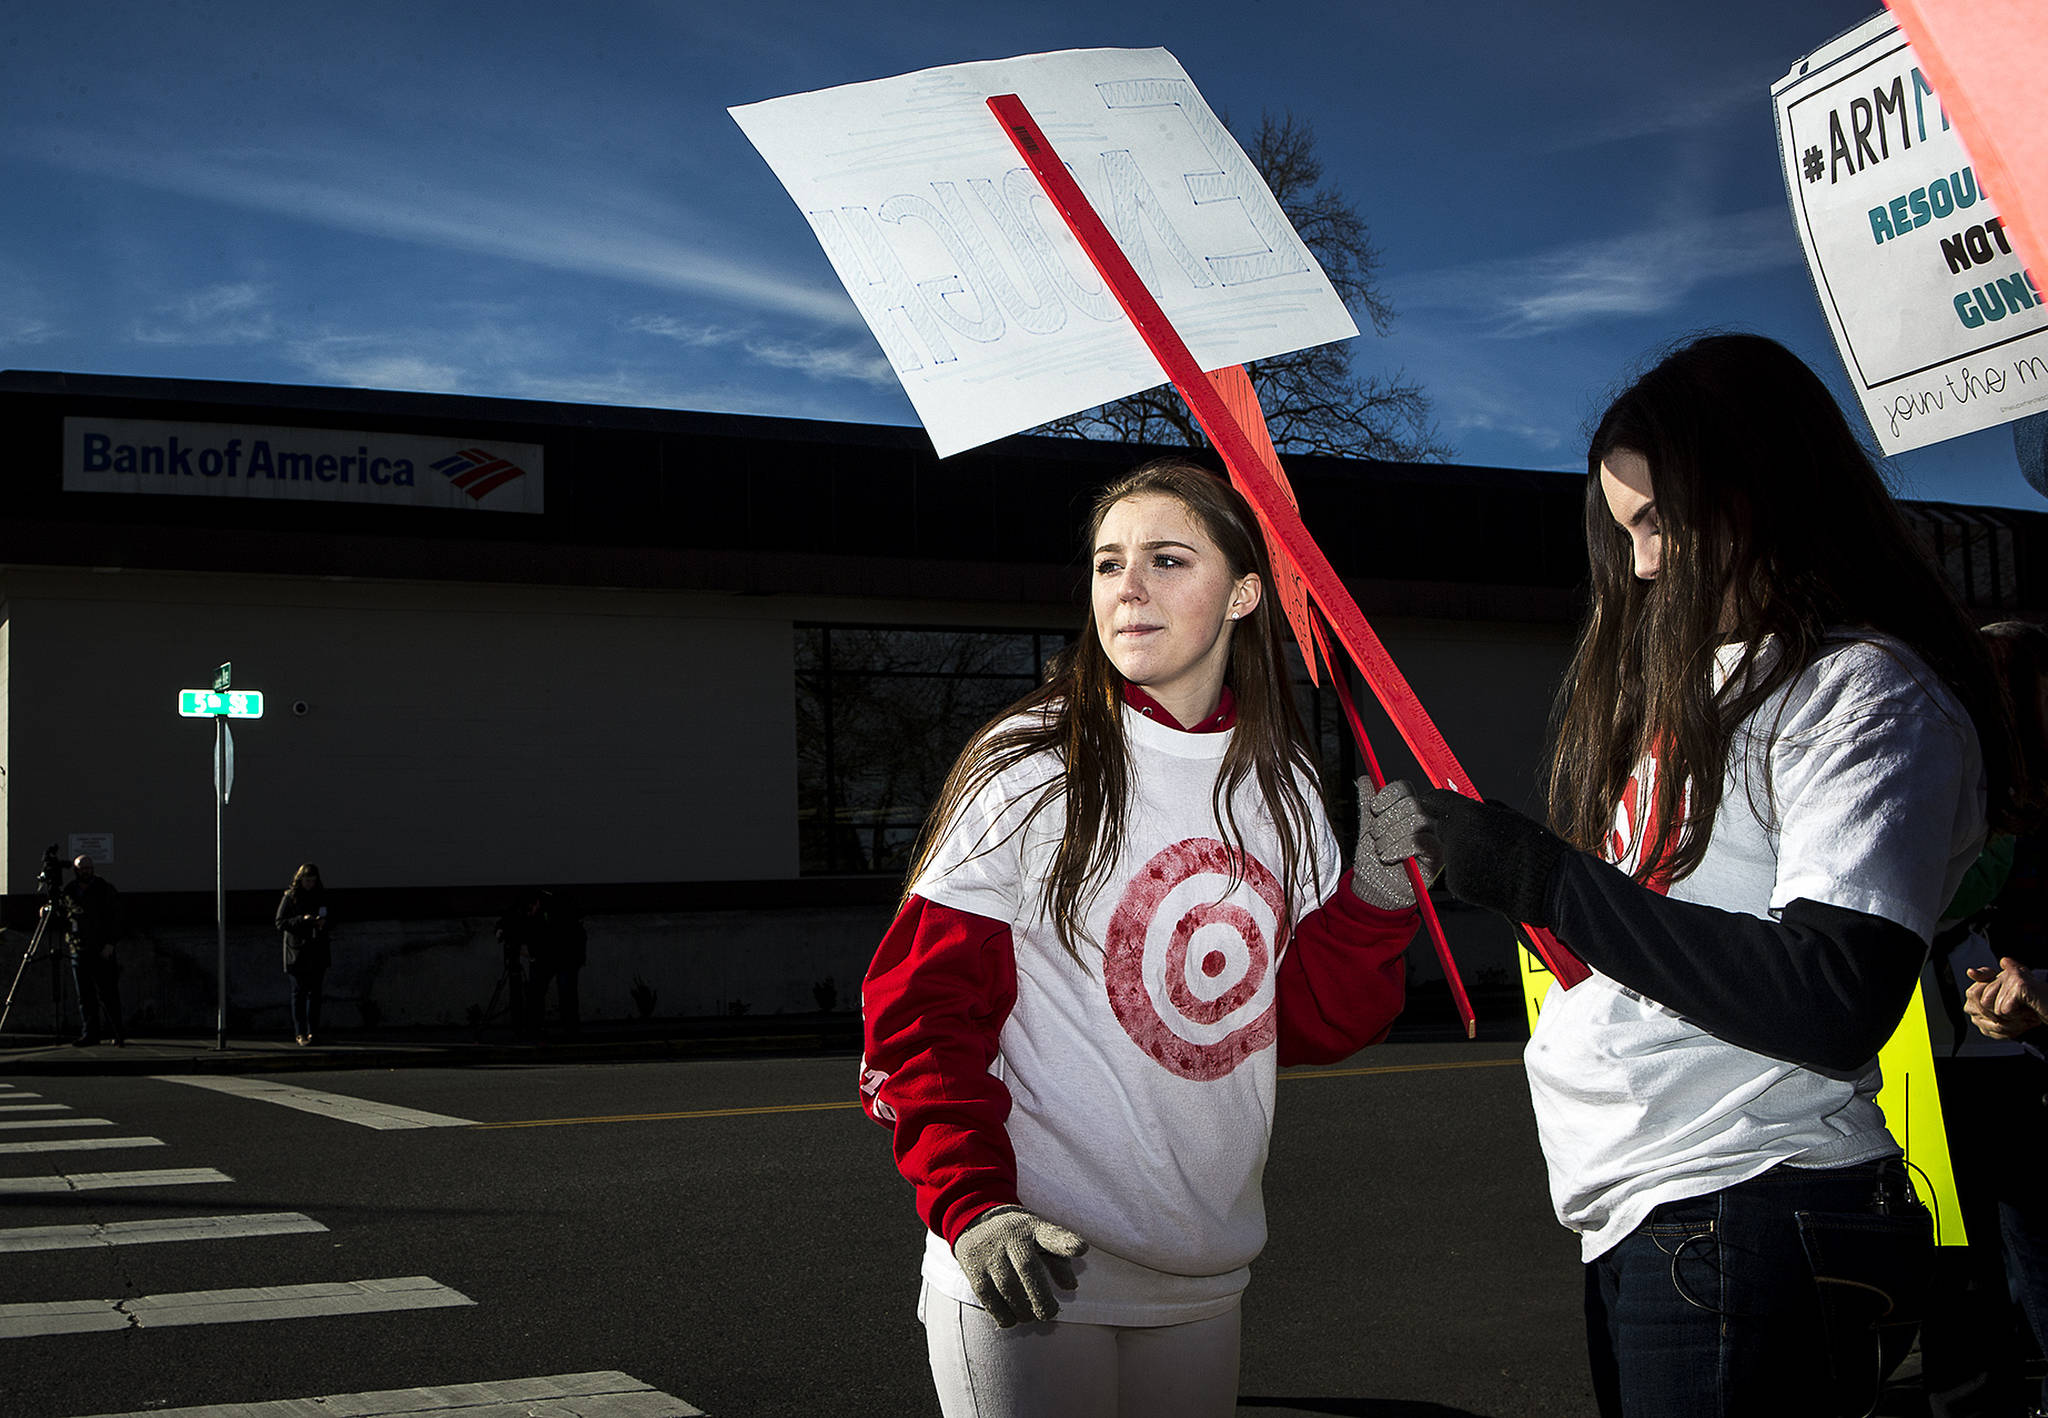 Mikaylah Himmelberger, a junior at Marysville Getchell High School, marches along with other students who organized a rally Saturday in Marysville calling for more mental healthcare support and increased gun regulations. Many students in attendance wore shirts with targets that had “Are we next?” printed on the back. (Ian Terry / The Herald)